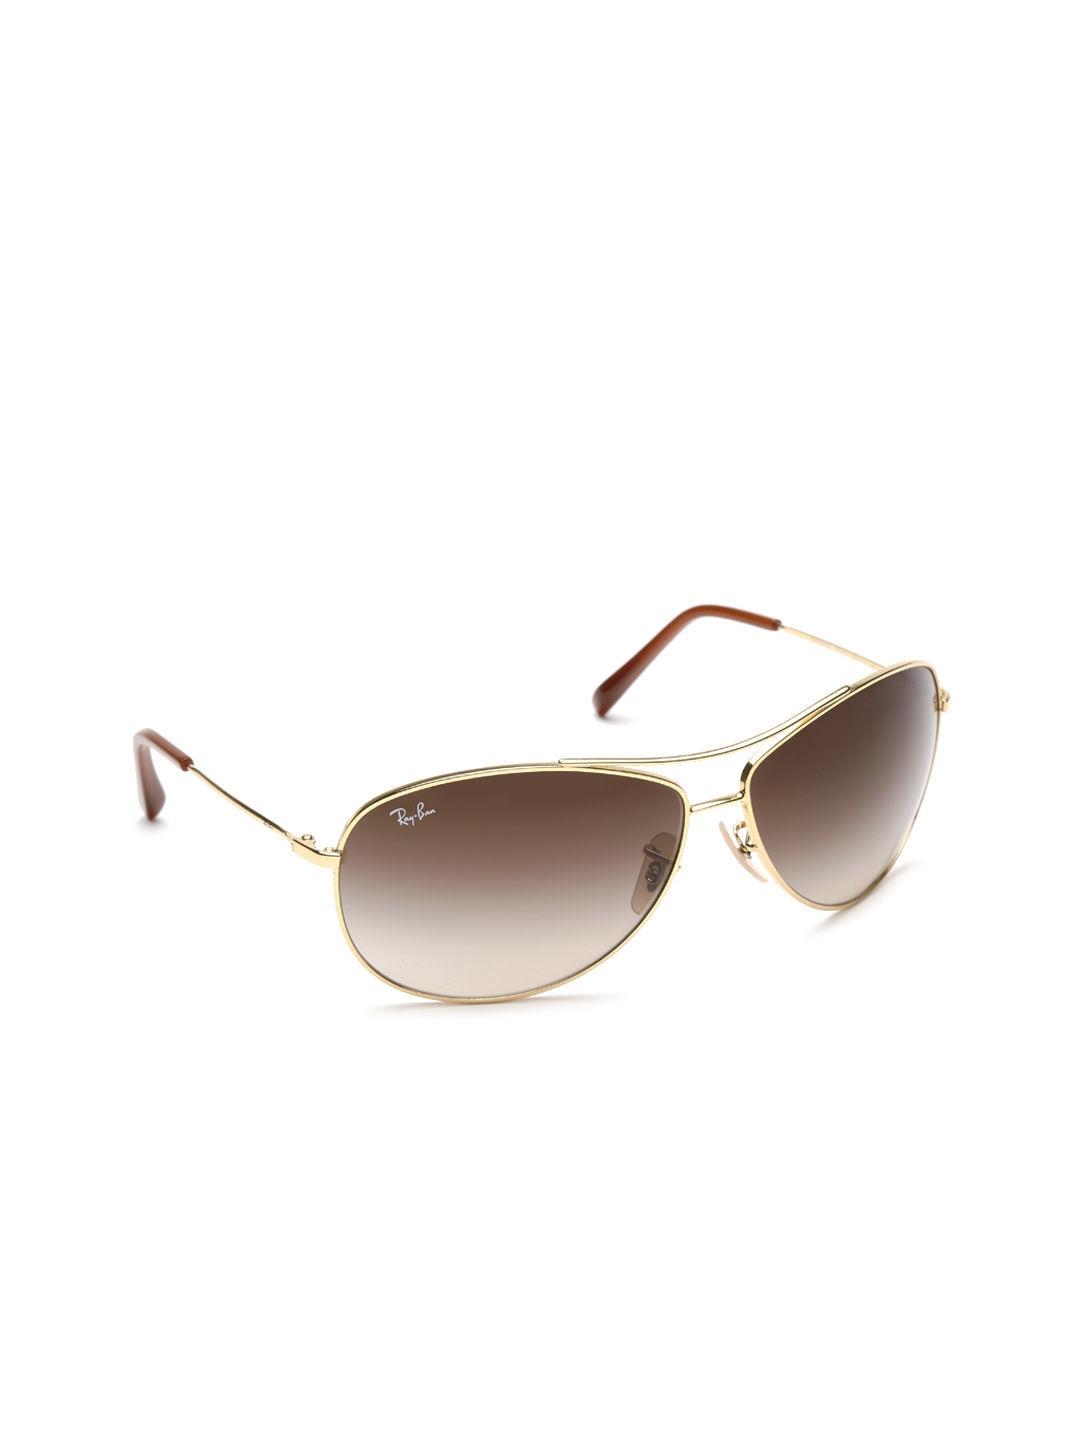 ray ban sunglasses lowest price online